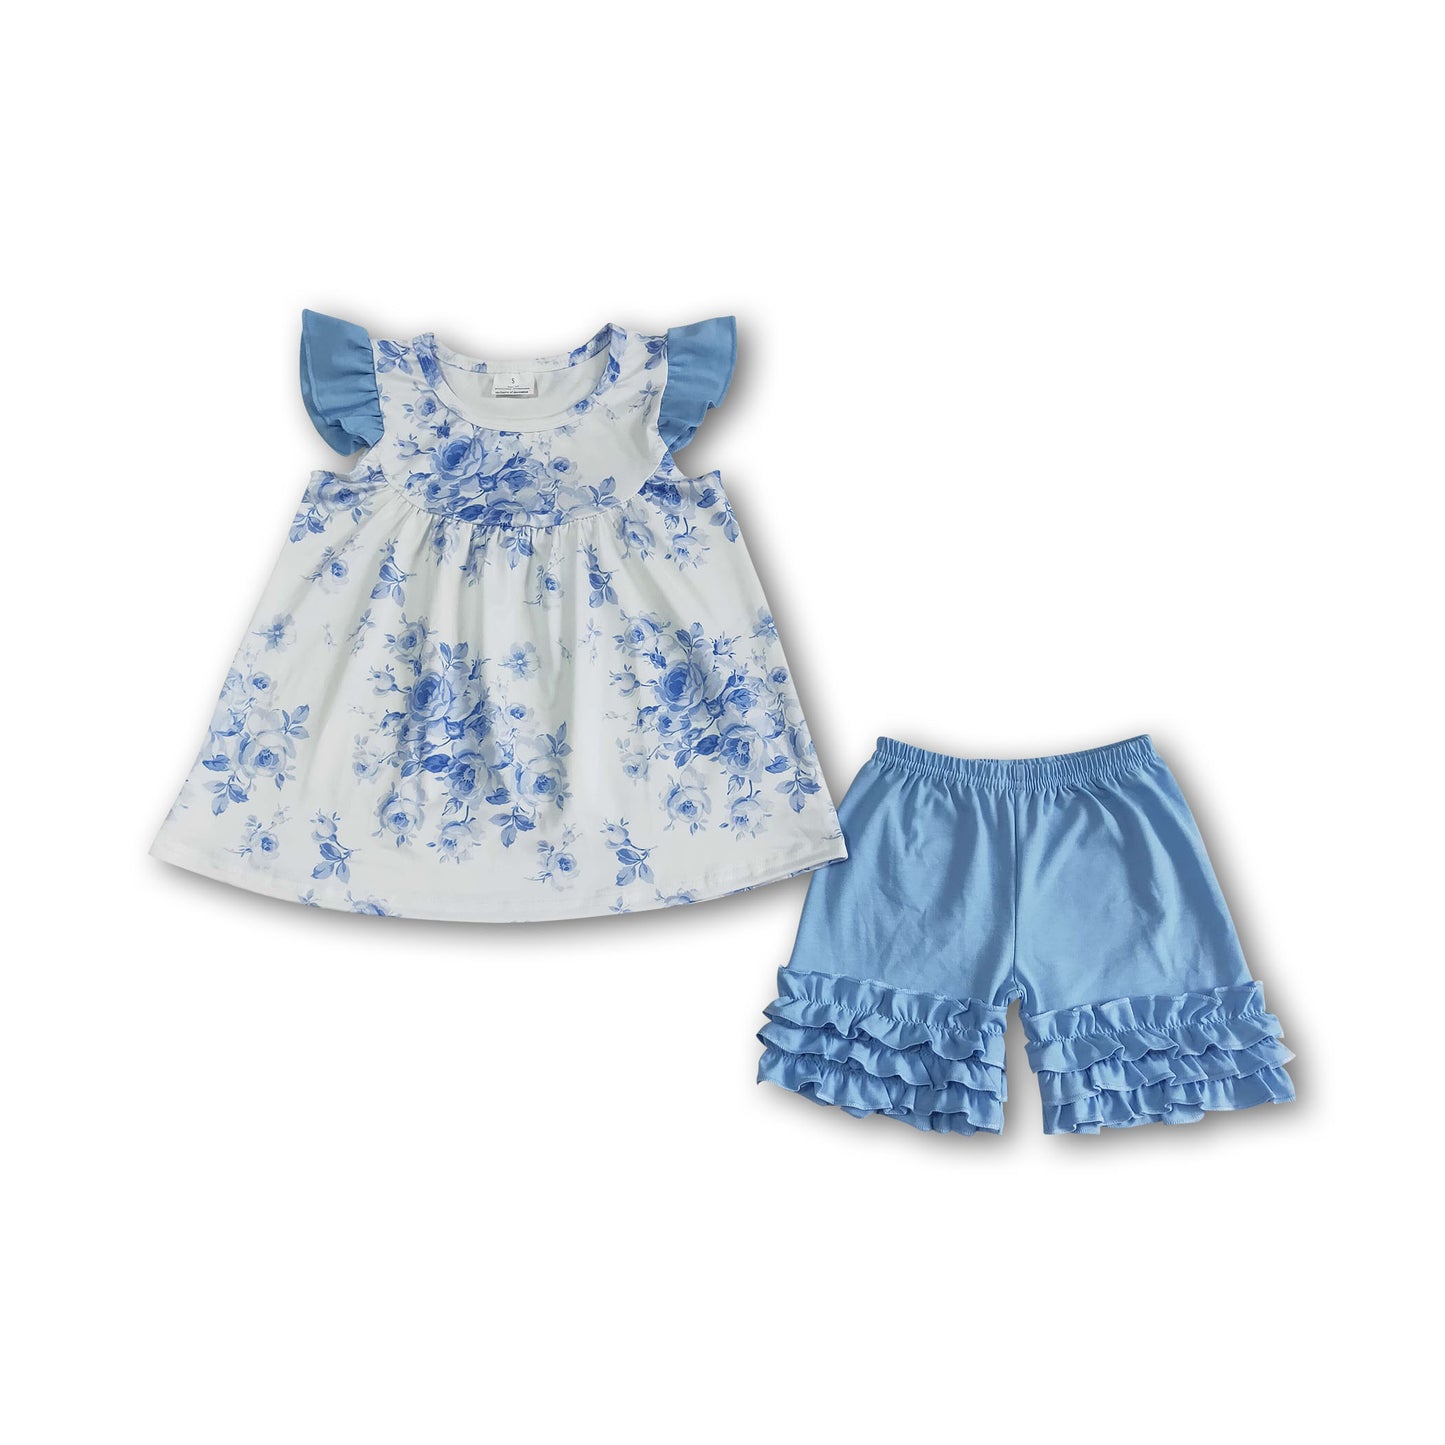 Blue floral icing ruffle shorts girls summer clothing